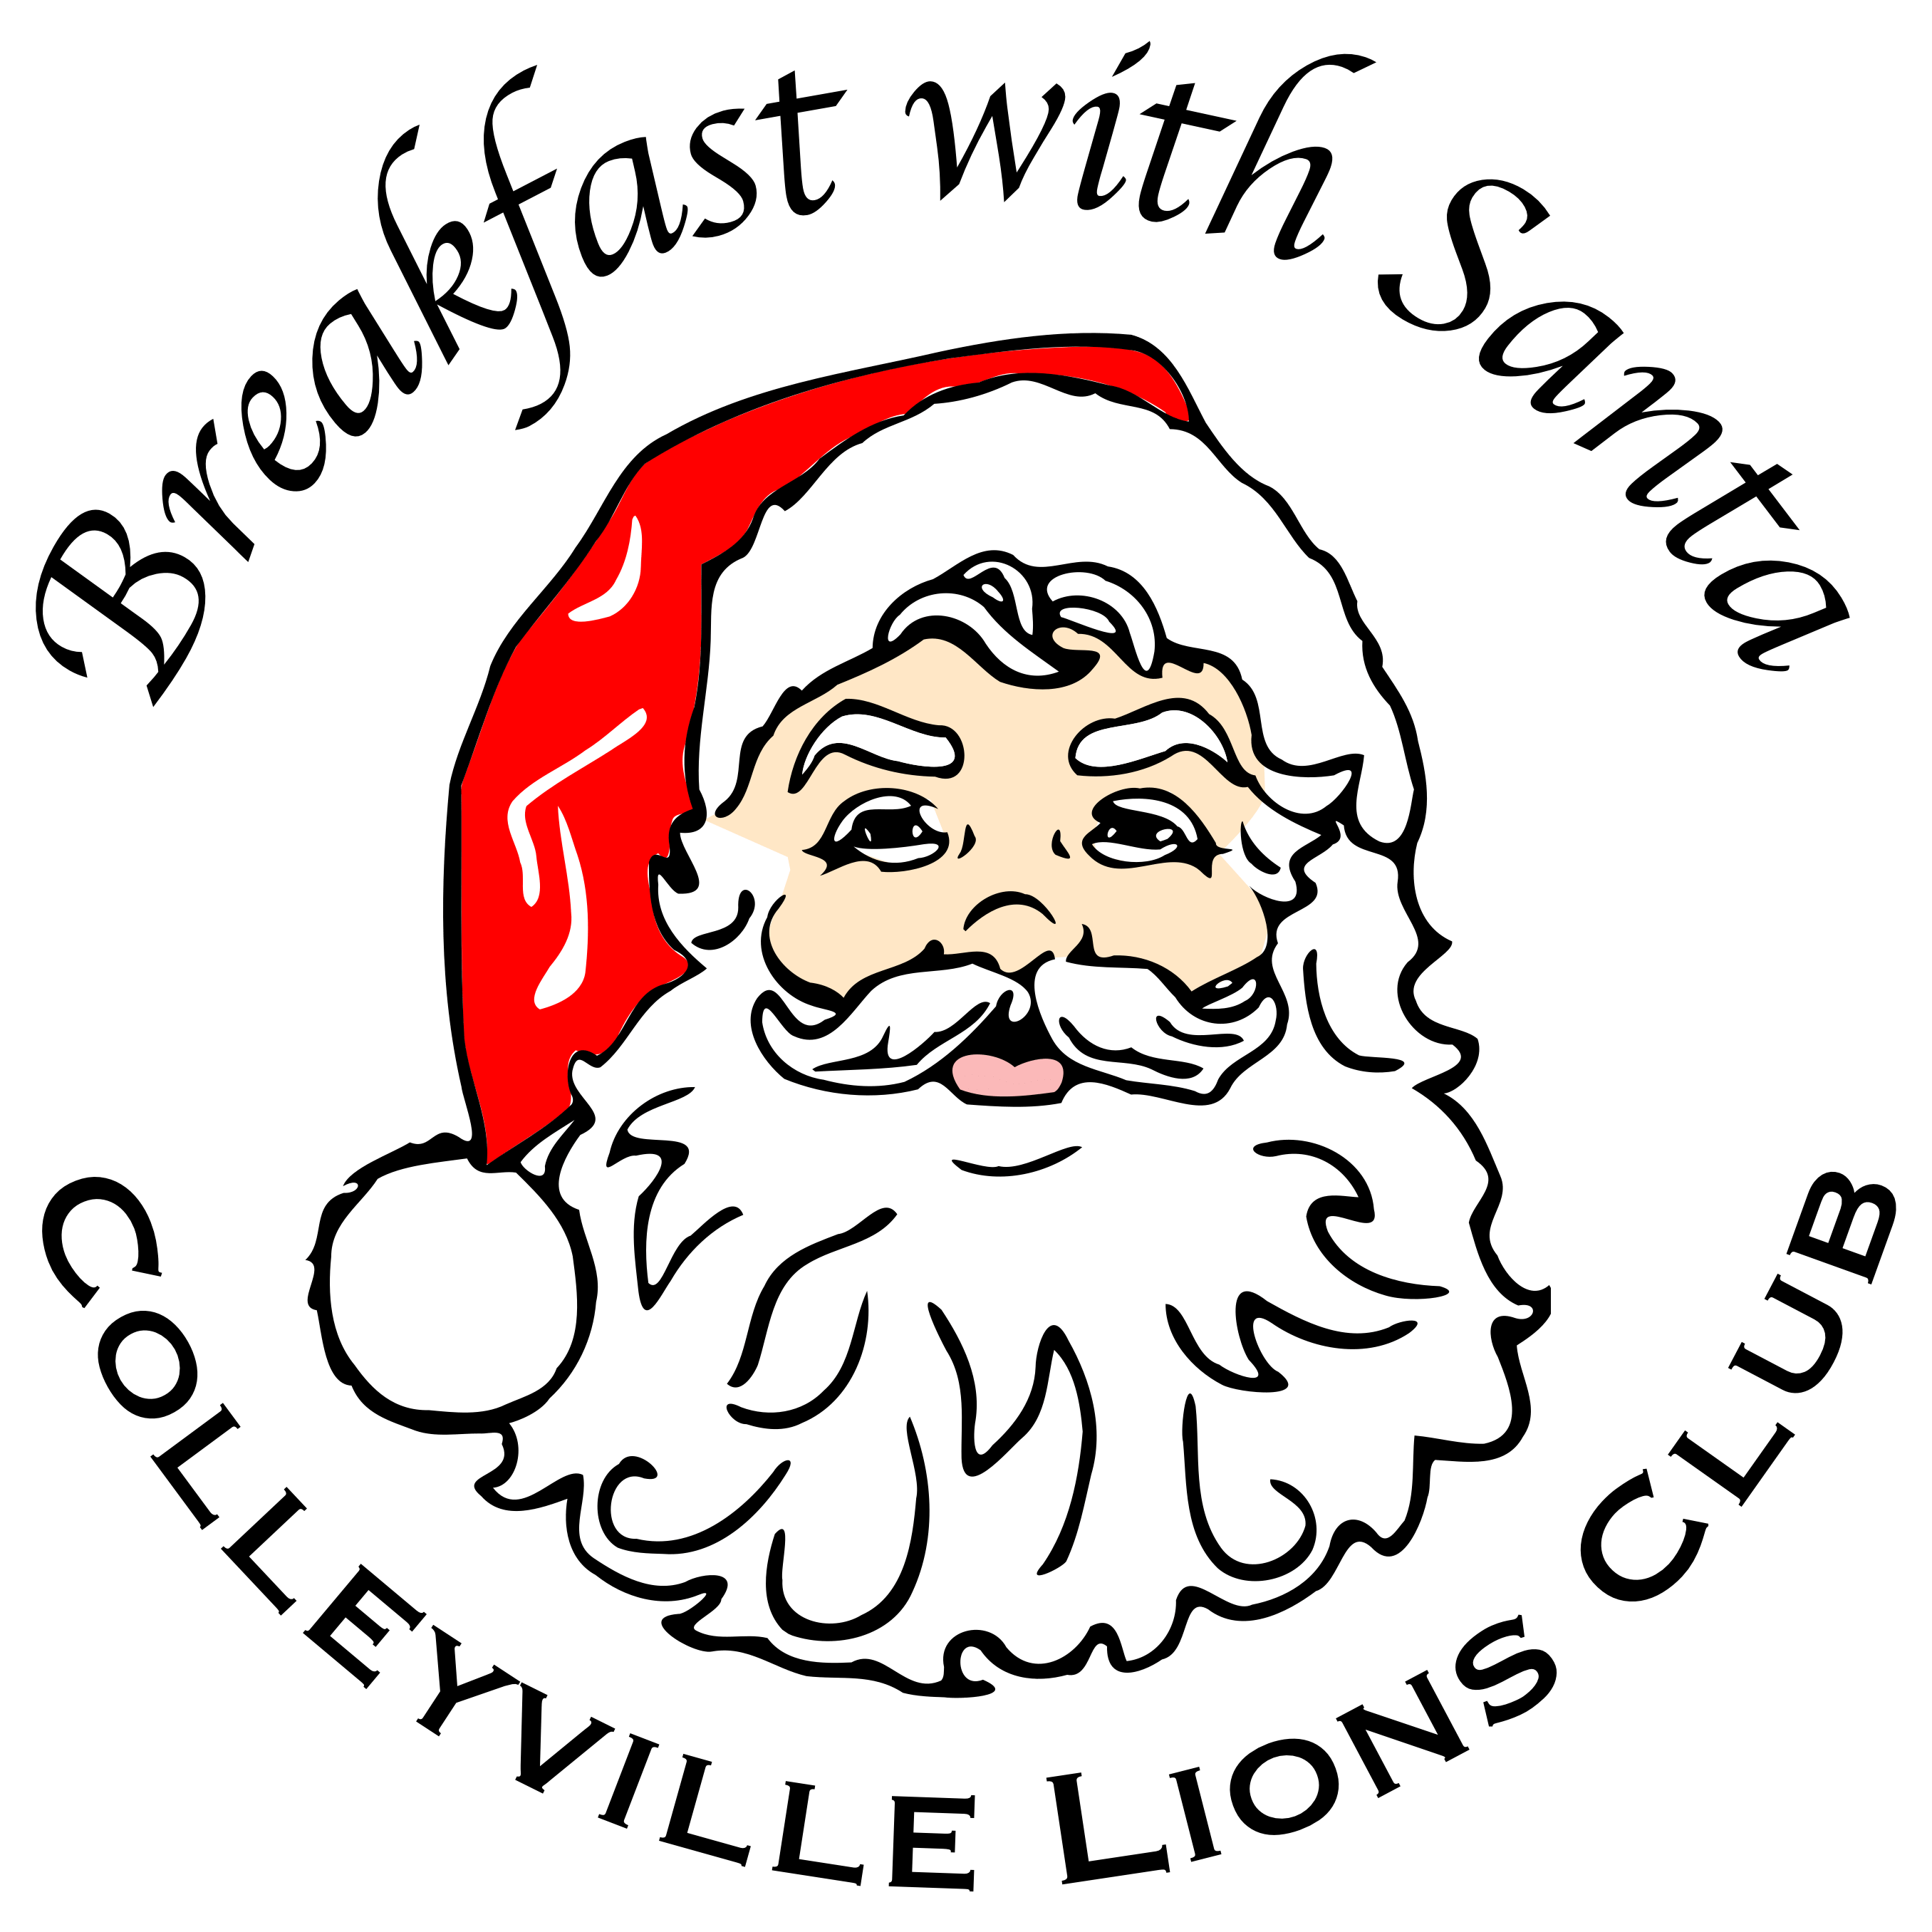 Breakfast With Santa - Colleyville Lions Club